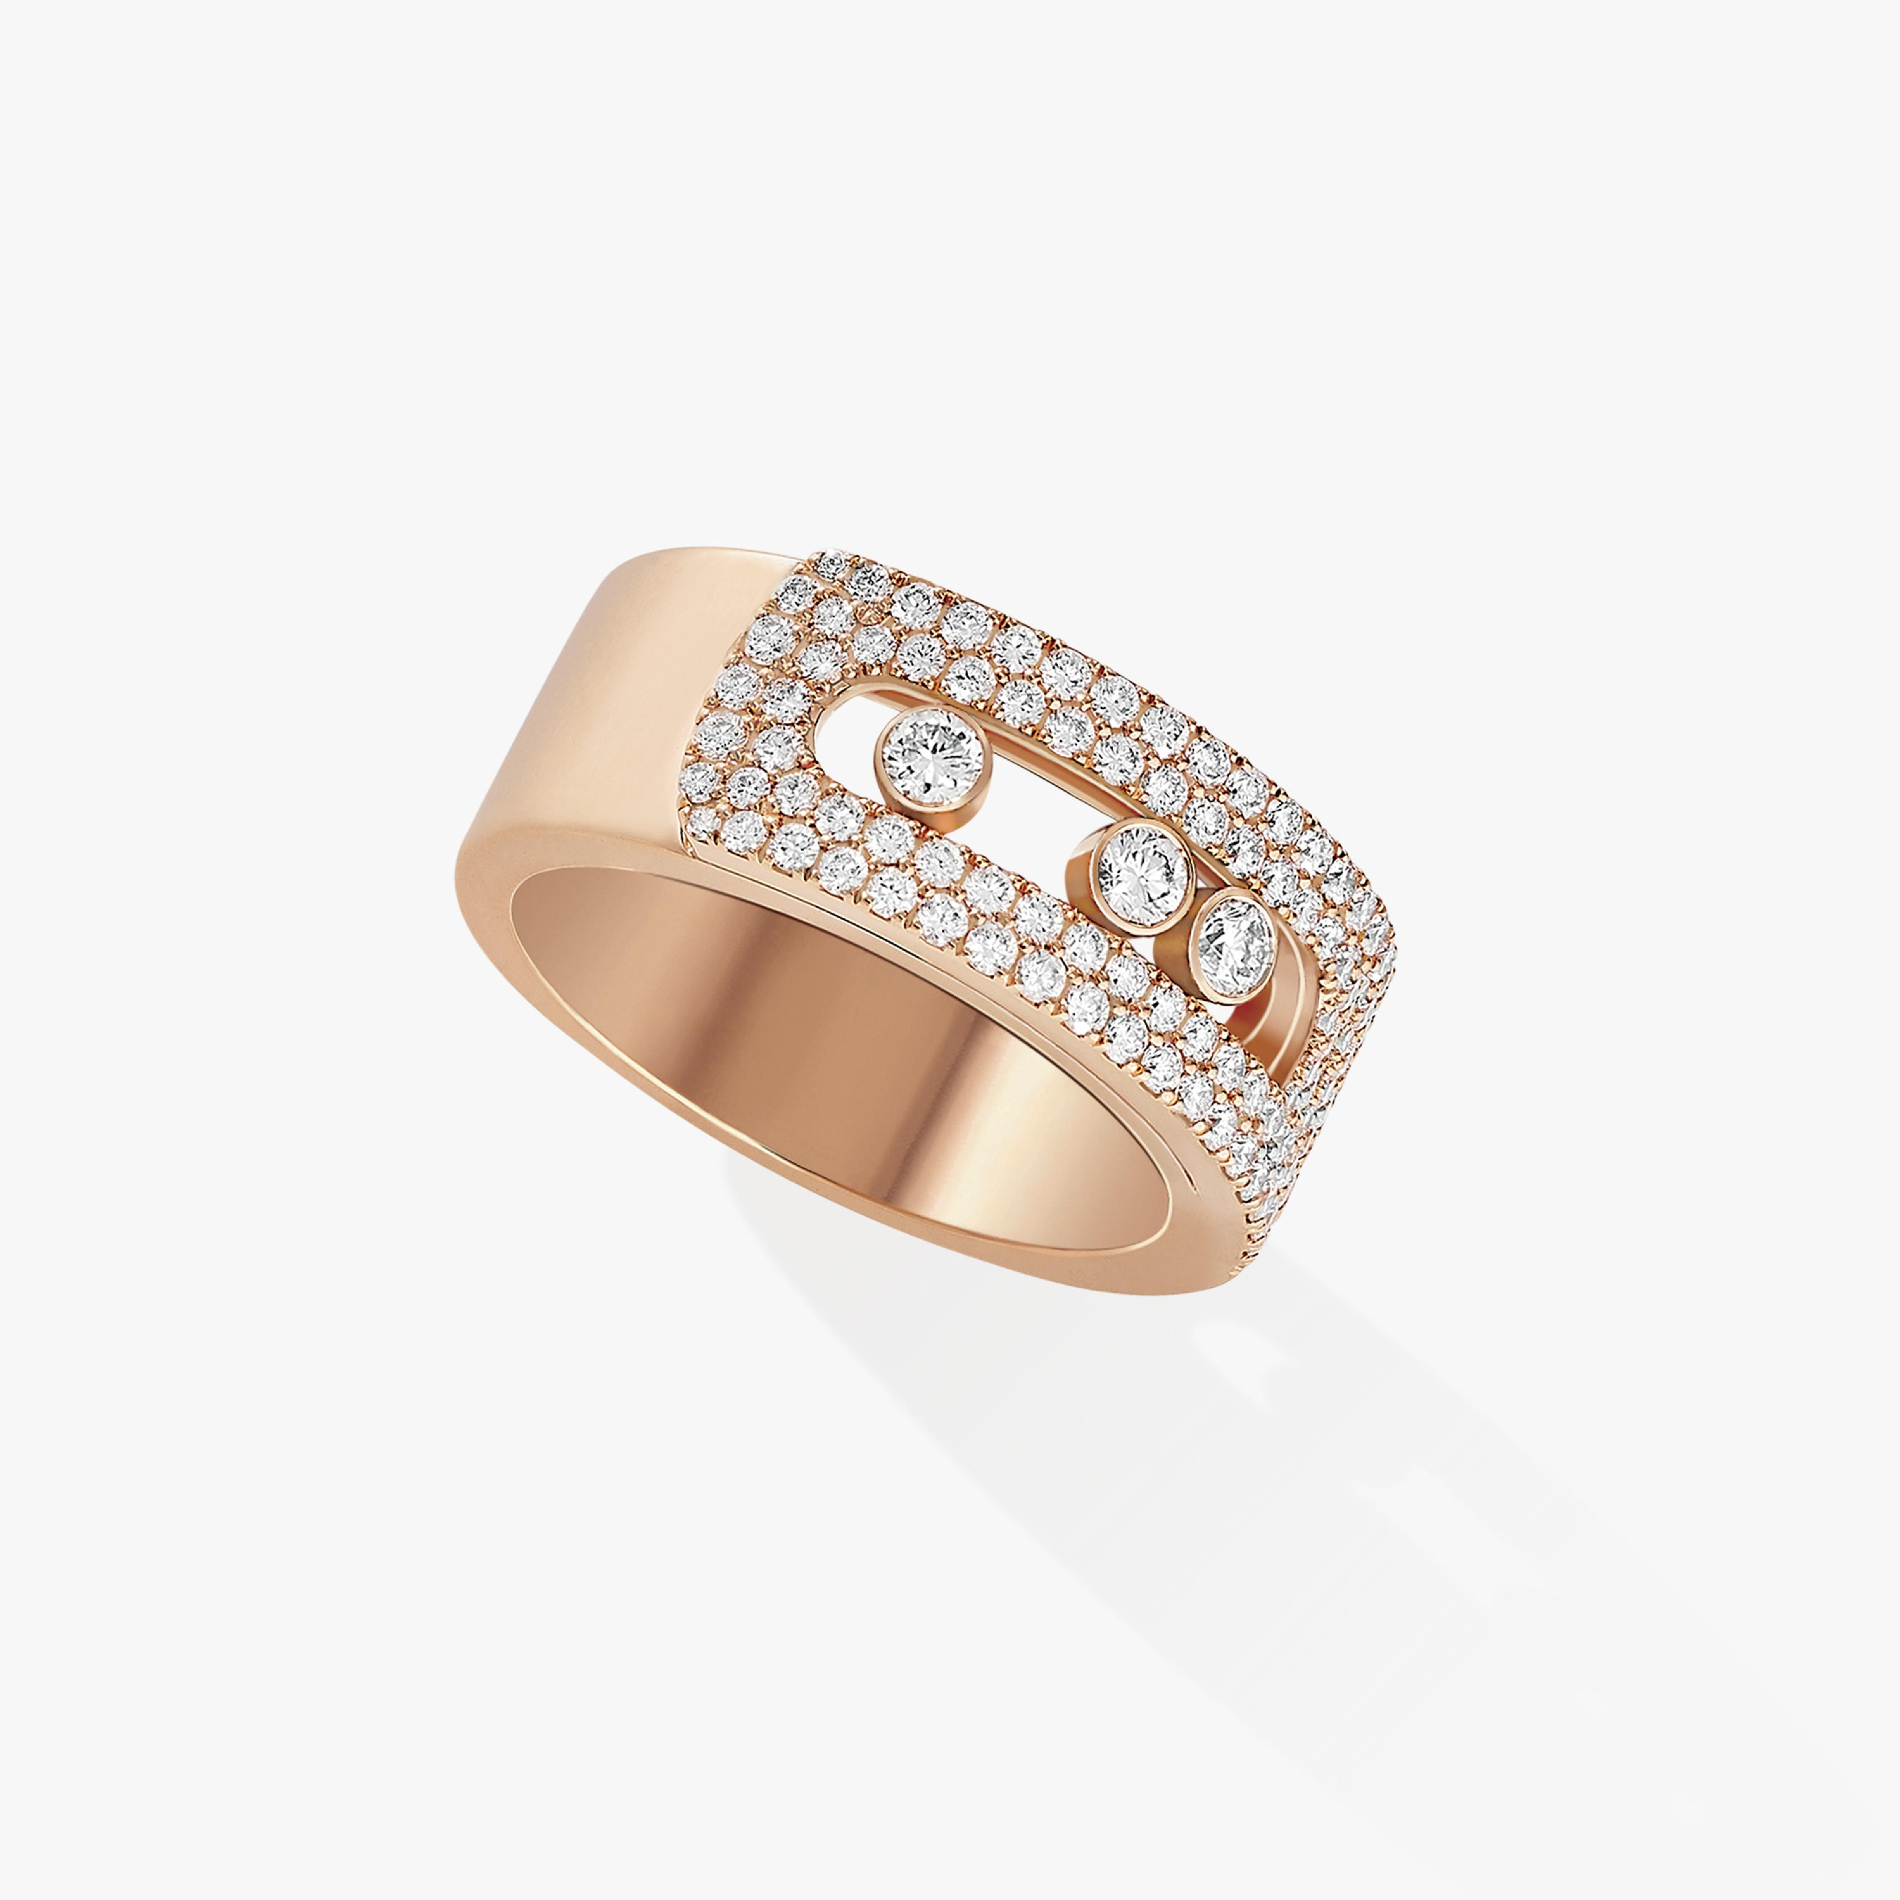 Move Noa LM Pavé  Pink Gold For Her Diamond Ring 10102-PG